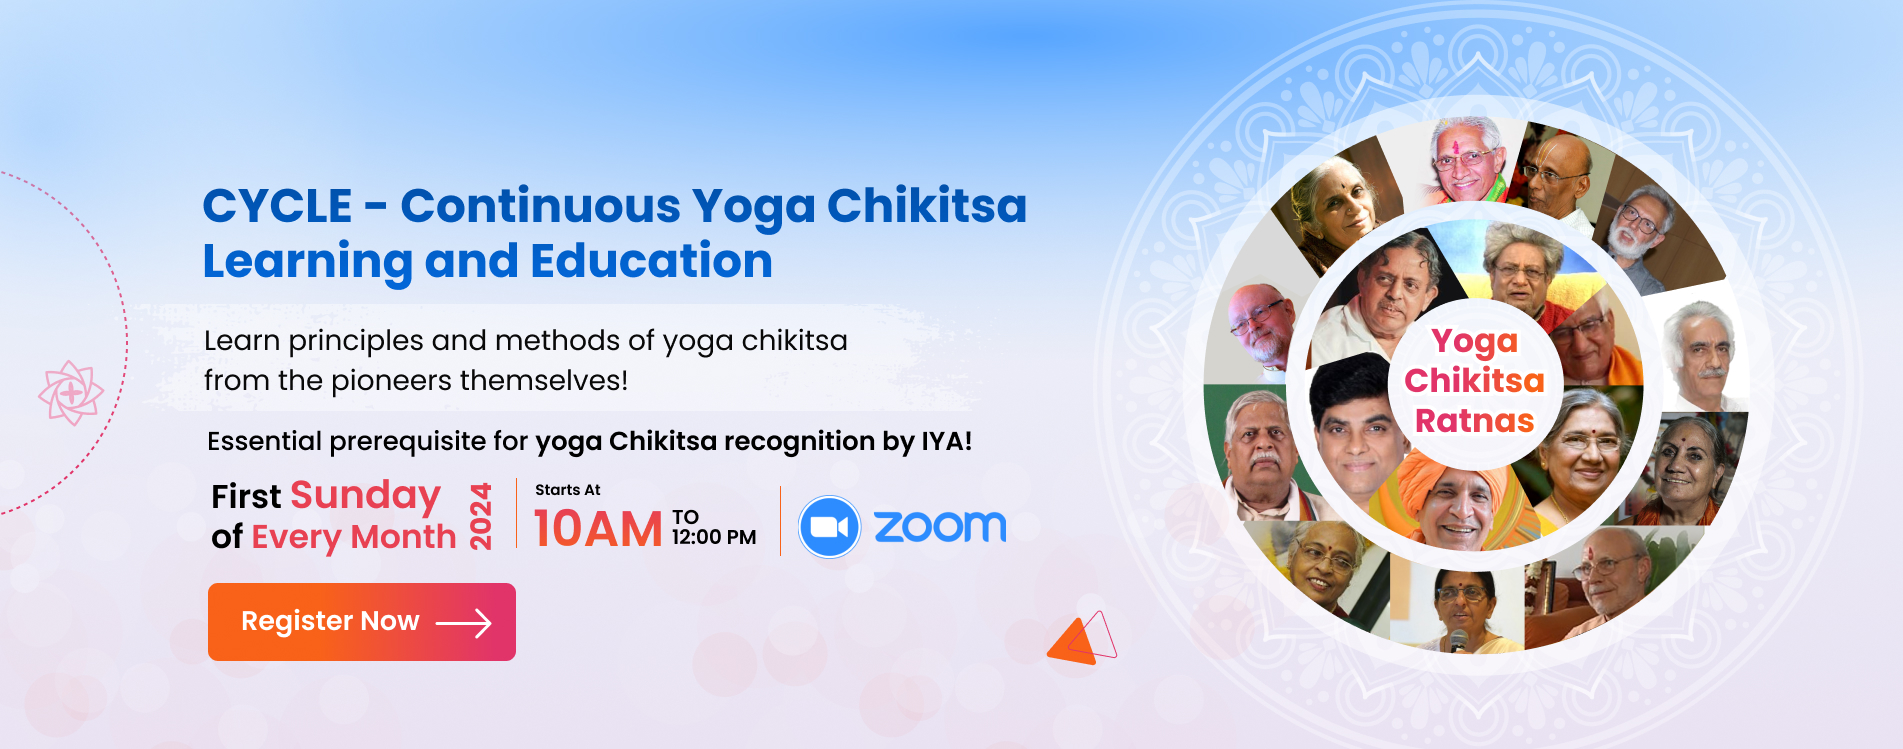 Continuous Yoga Chikitsa Learning and Education (1)